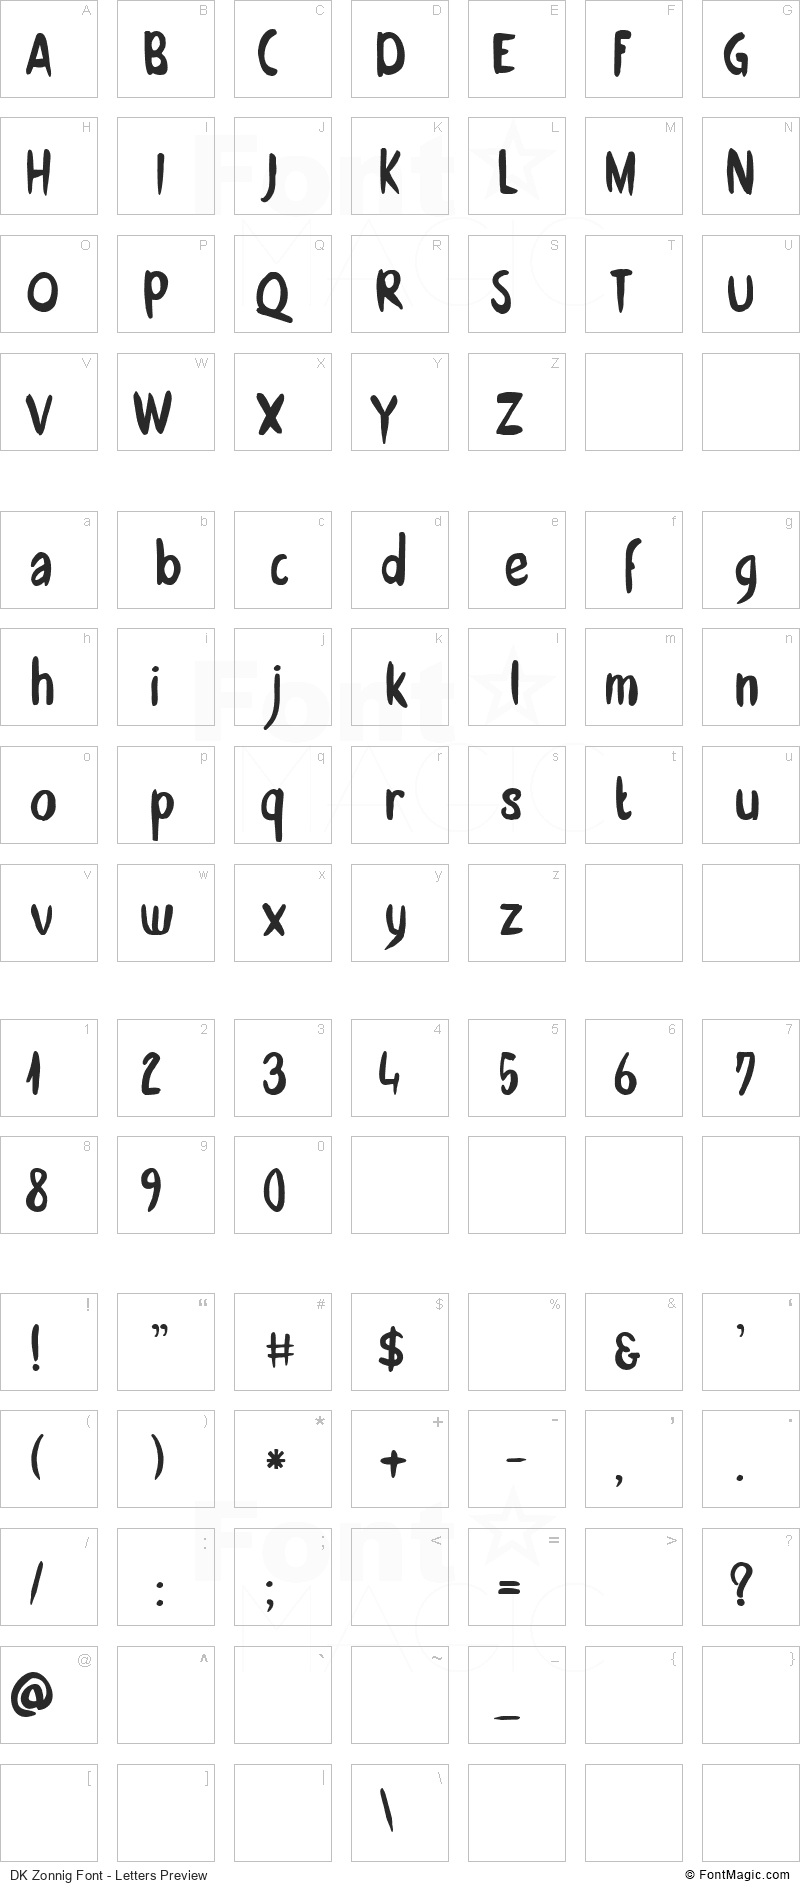 DK Zonnig Font - All Latters Preview Chart